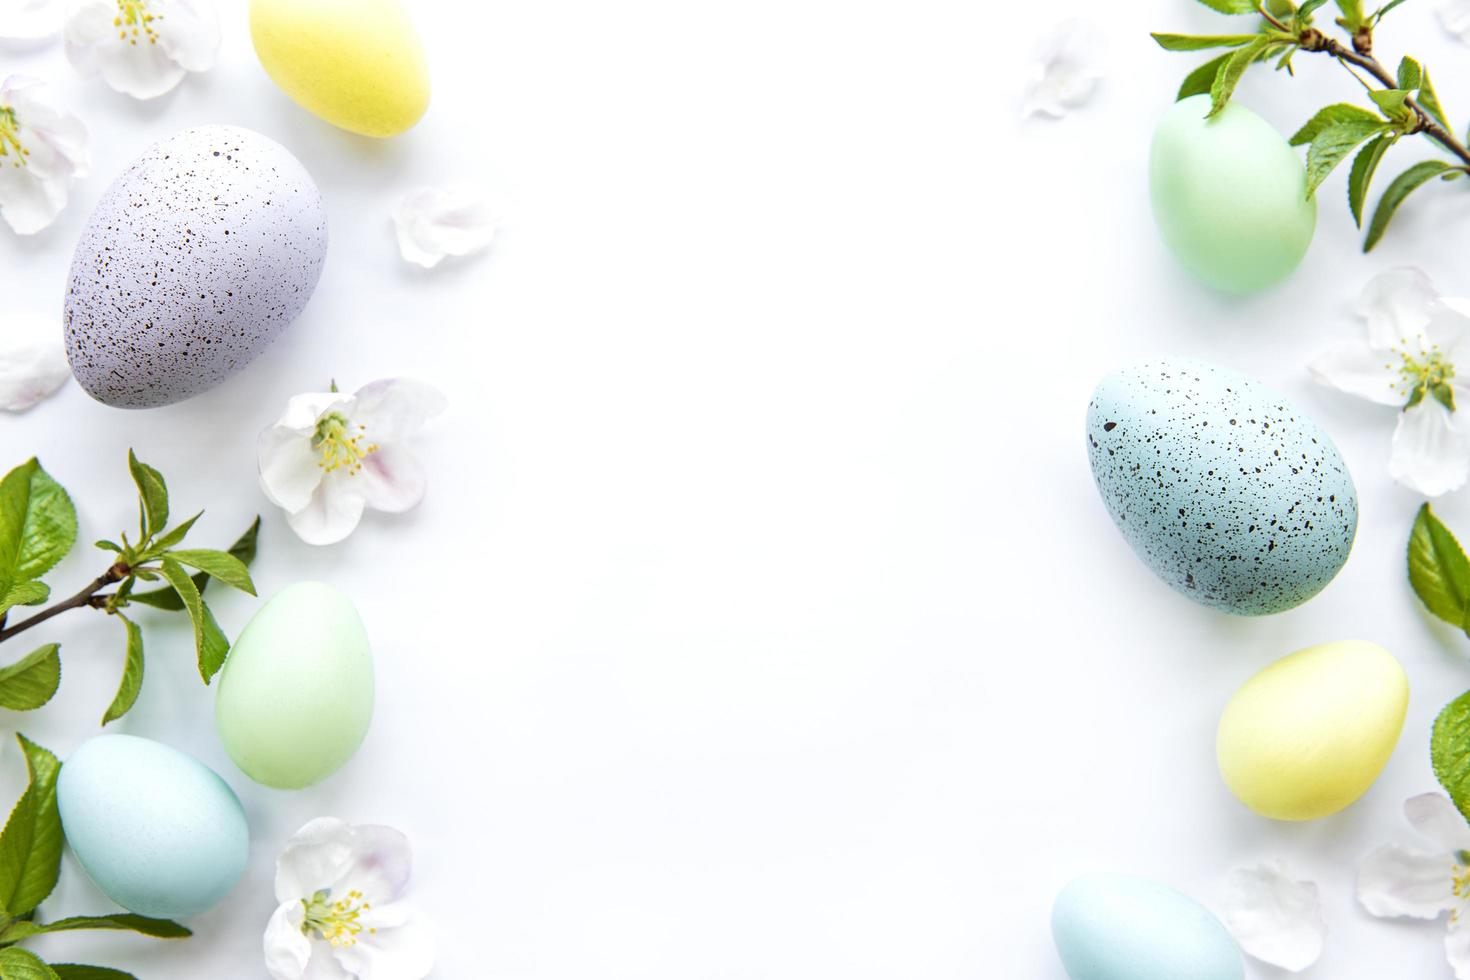 Colorful Easter eggs with spring blossom flowers photo